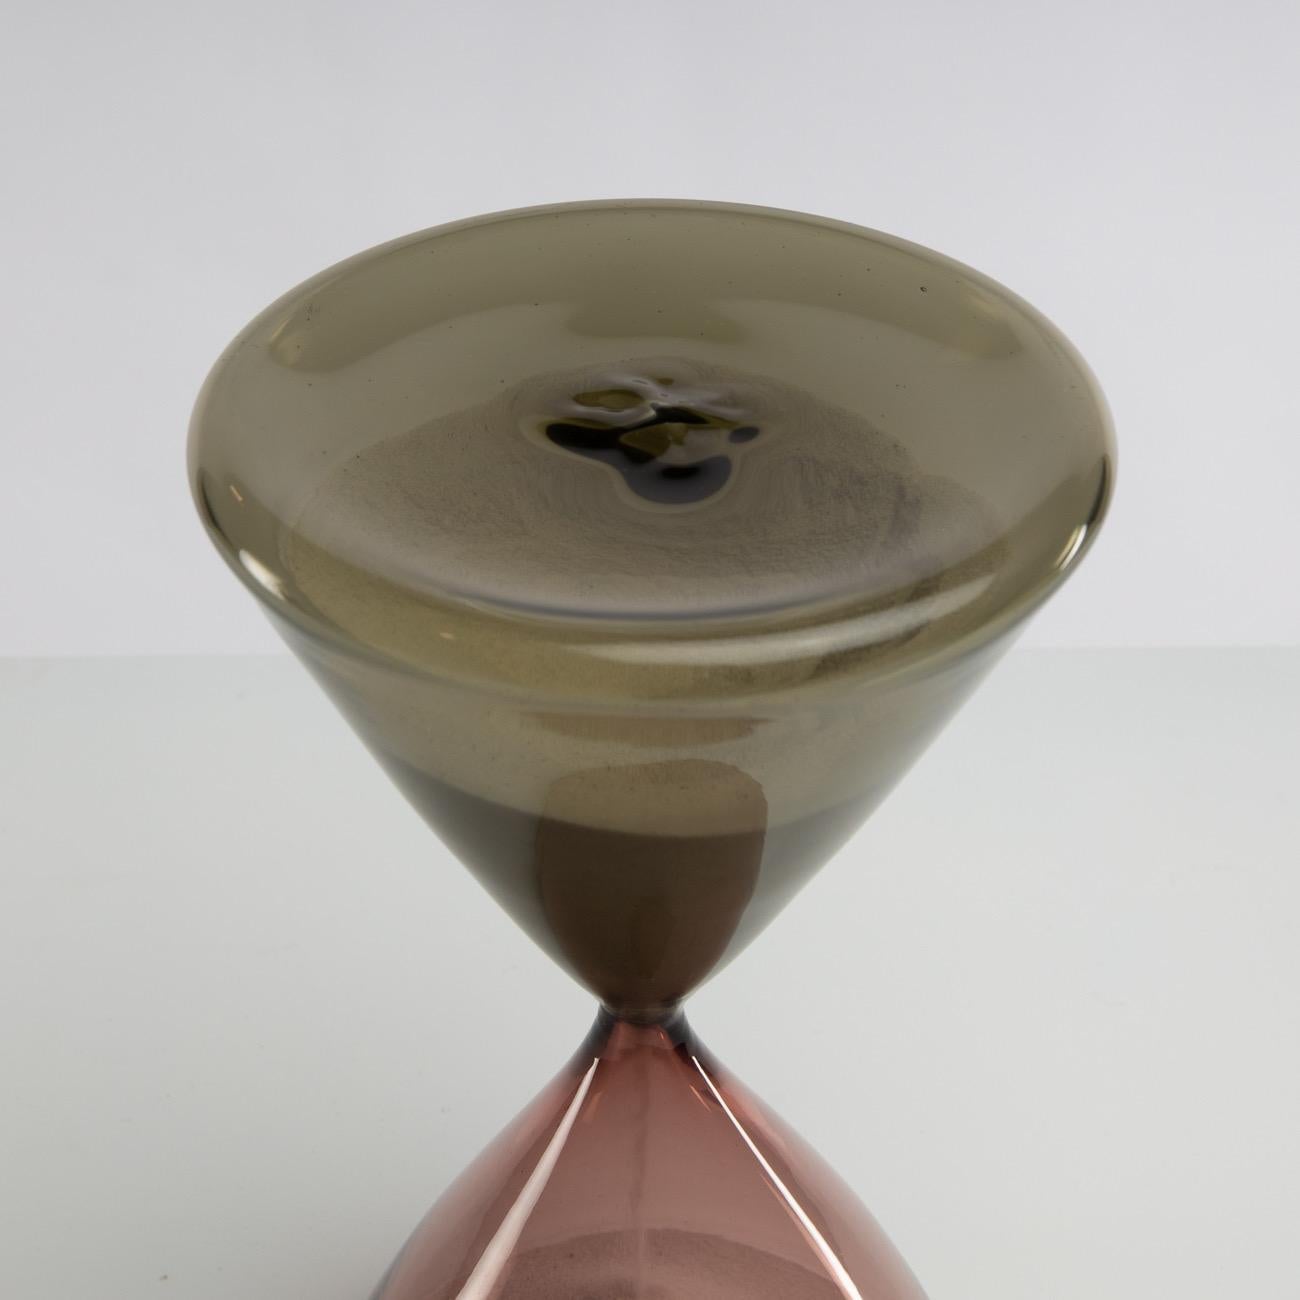 The hourglasses designed by Paolo Venini in 1957 were exhibited at the Triennale di Milano the same year. 
This piece is a large and rare model. The two parts have a conical shape and different colours: one is pink and the other is